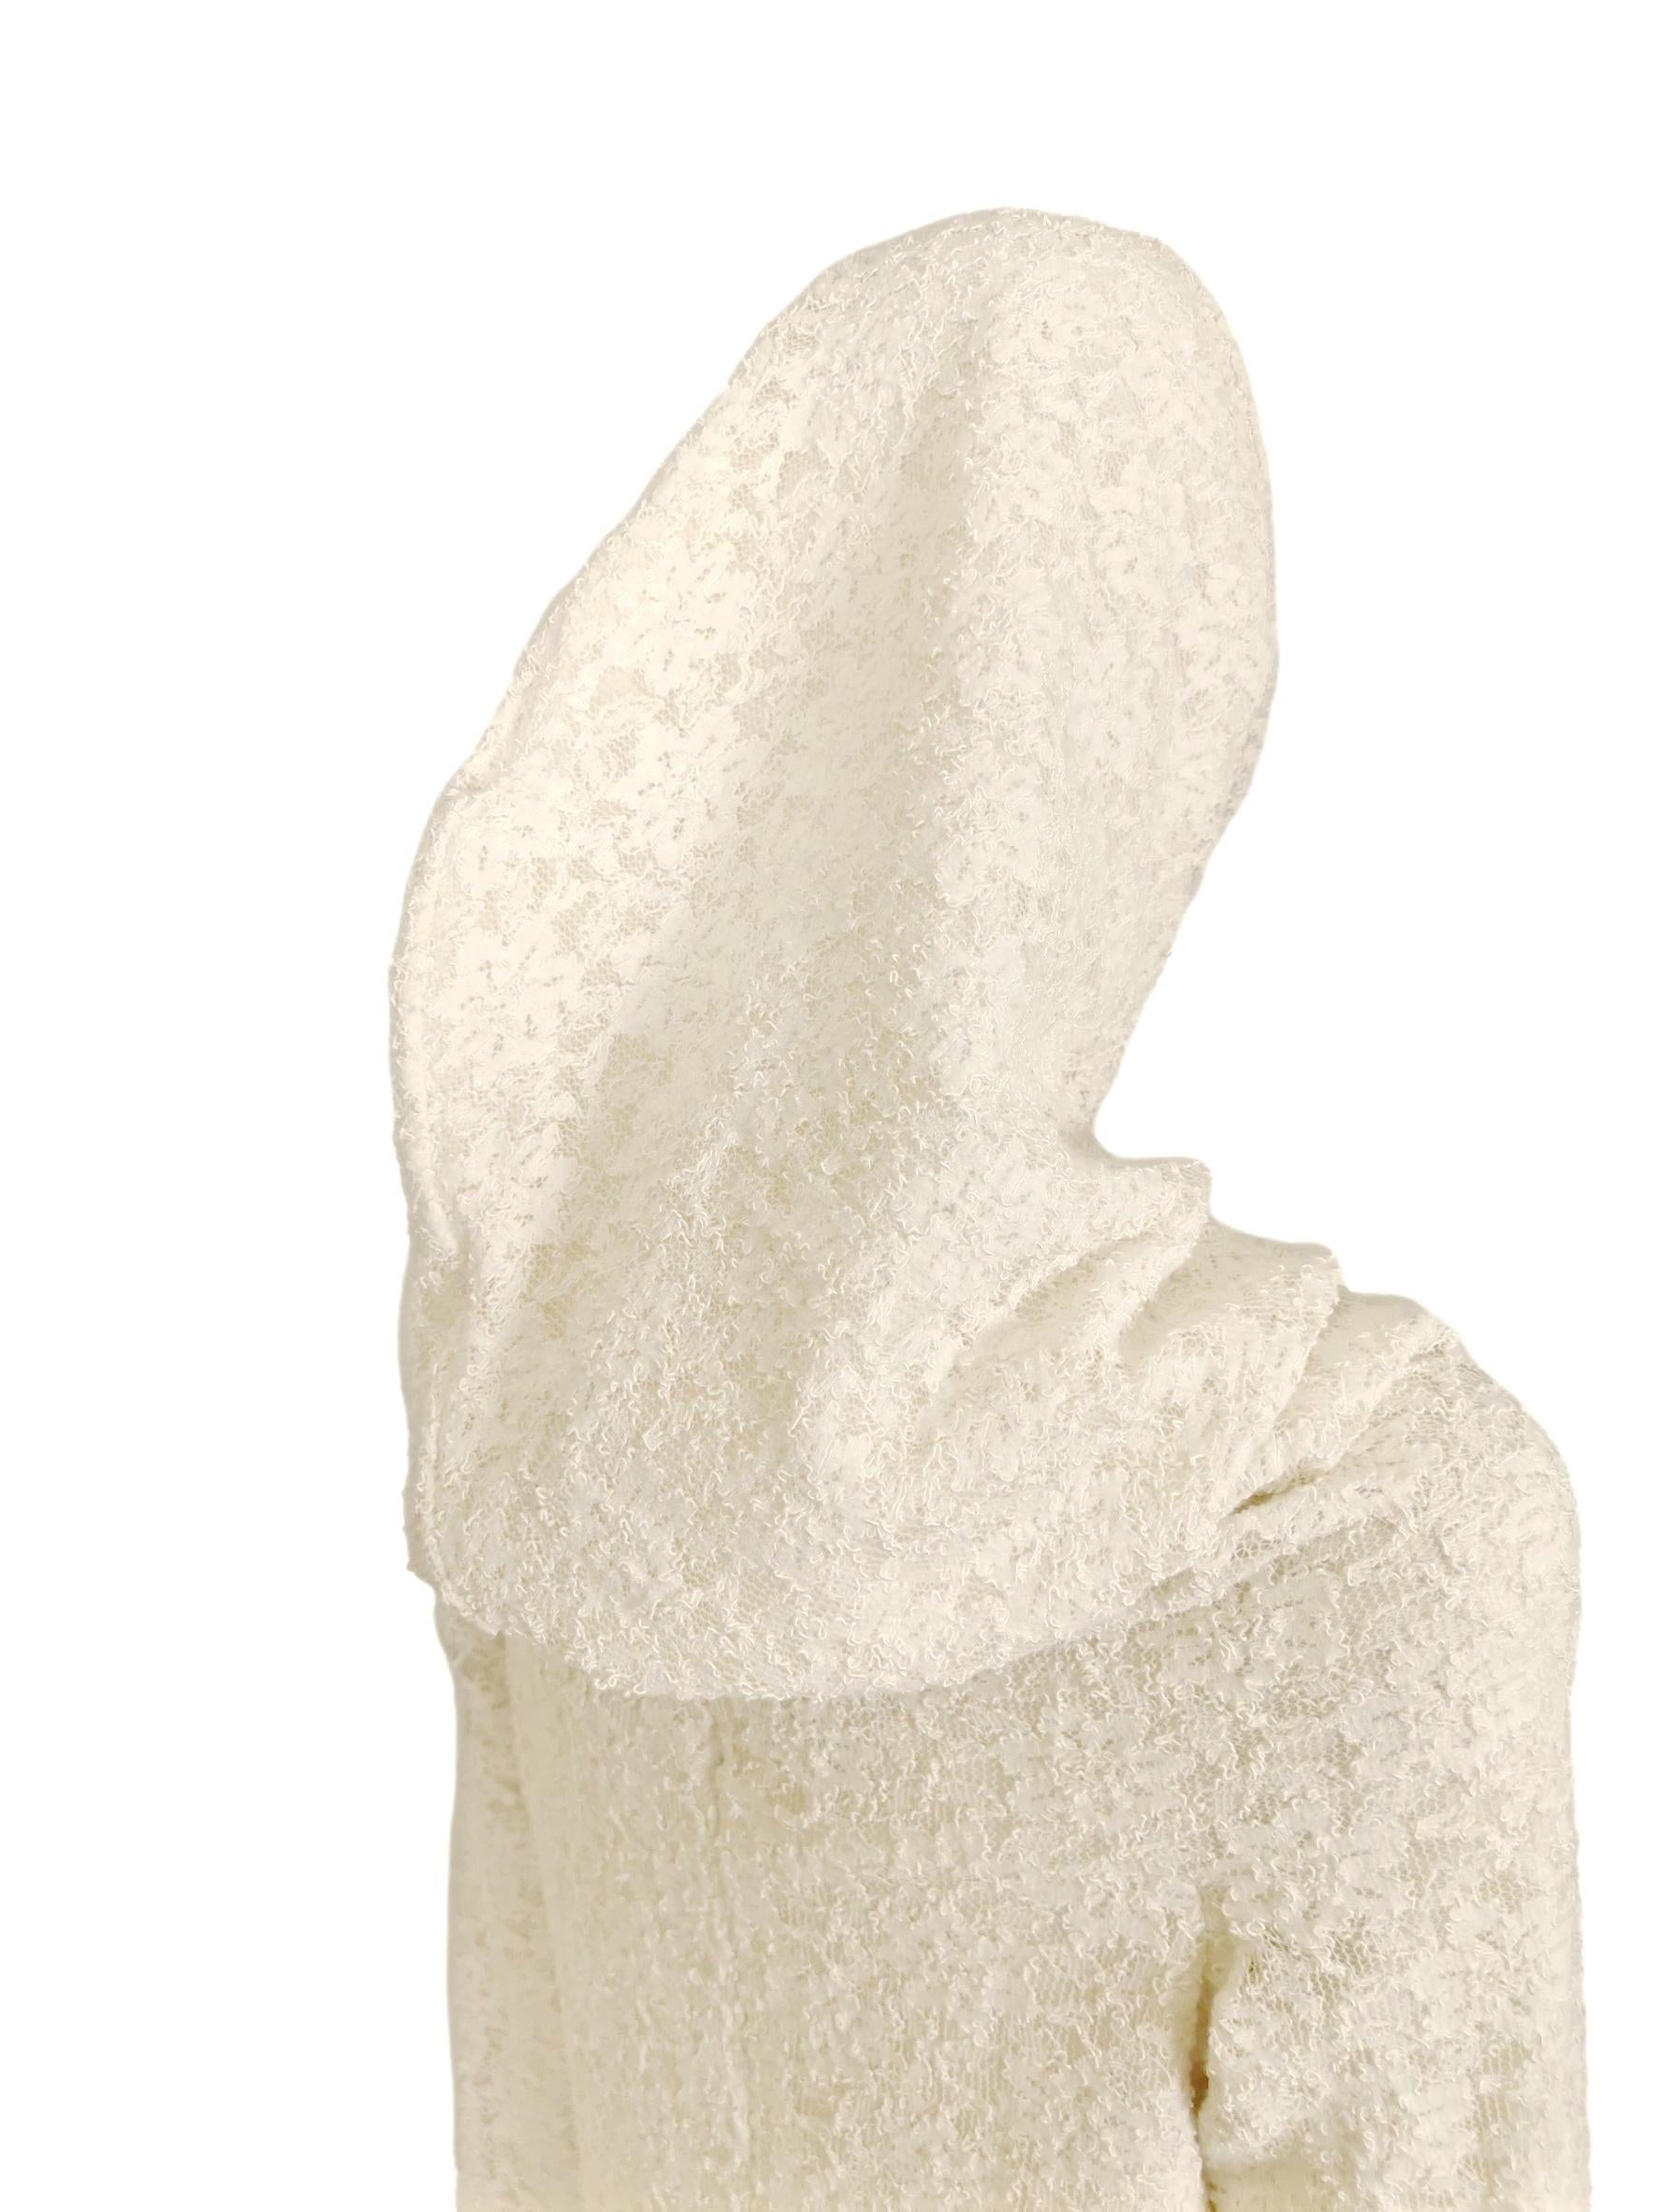 Comme Des Garcons White Drama Cowl Hooded Dress AD 2011 For Sale 8